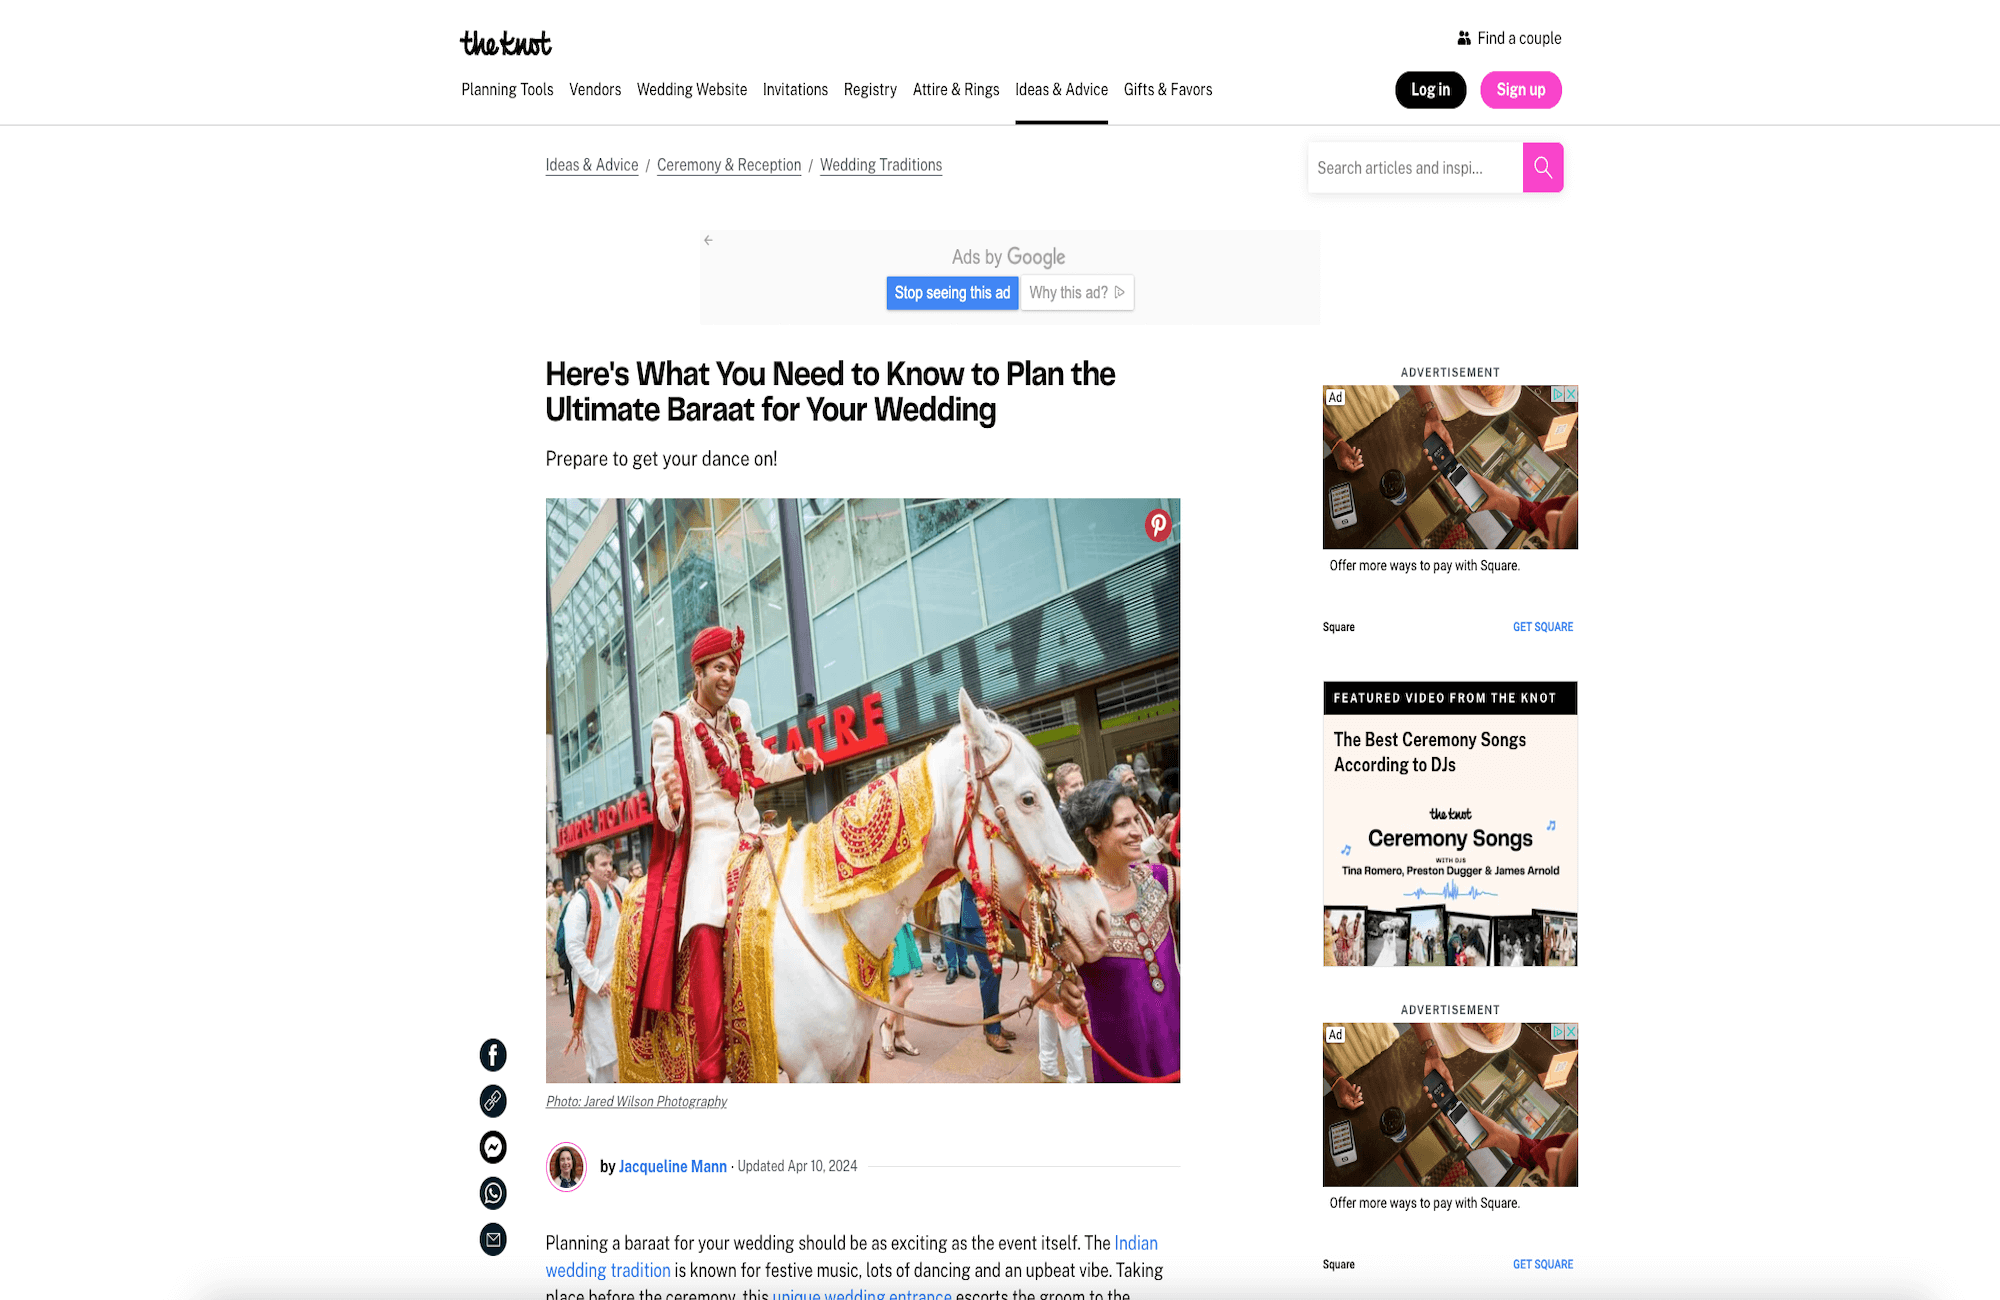 Here’s What You Need to Know to Plan the Ultimate Baraat for Your Wedding